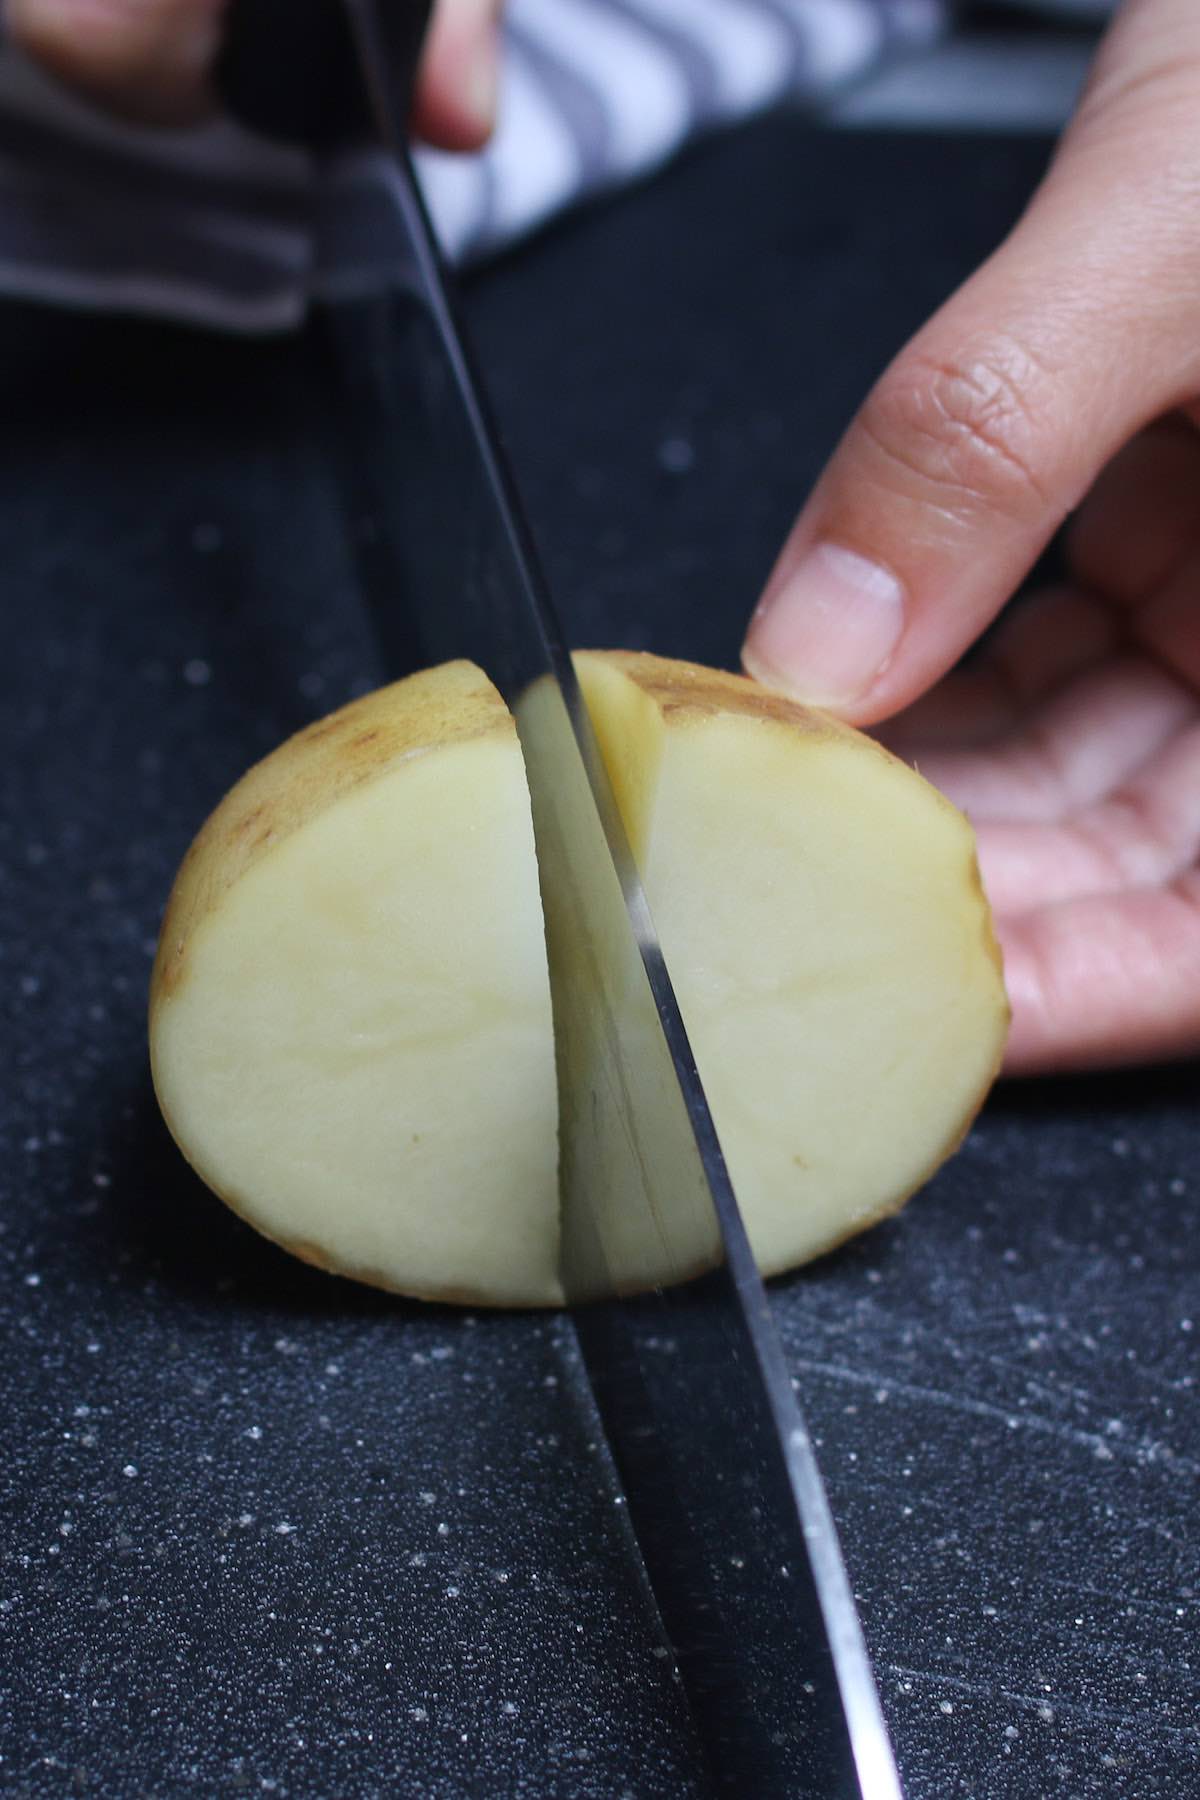 Cutting a raw white potato into quarters with a chef's knife for faster boiling